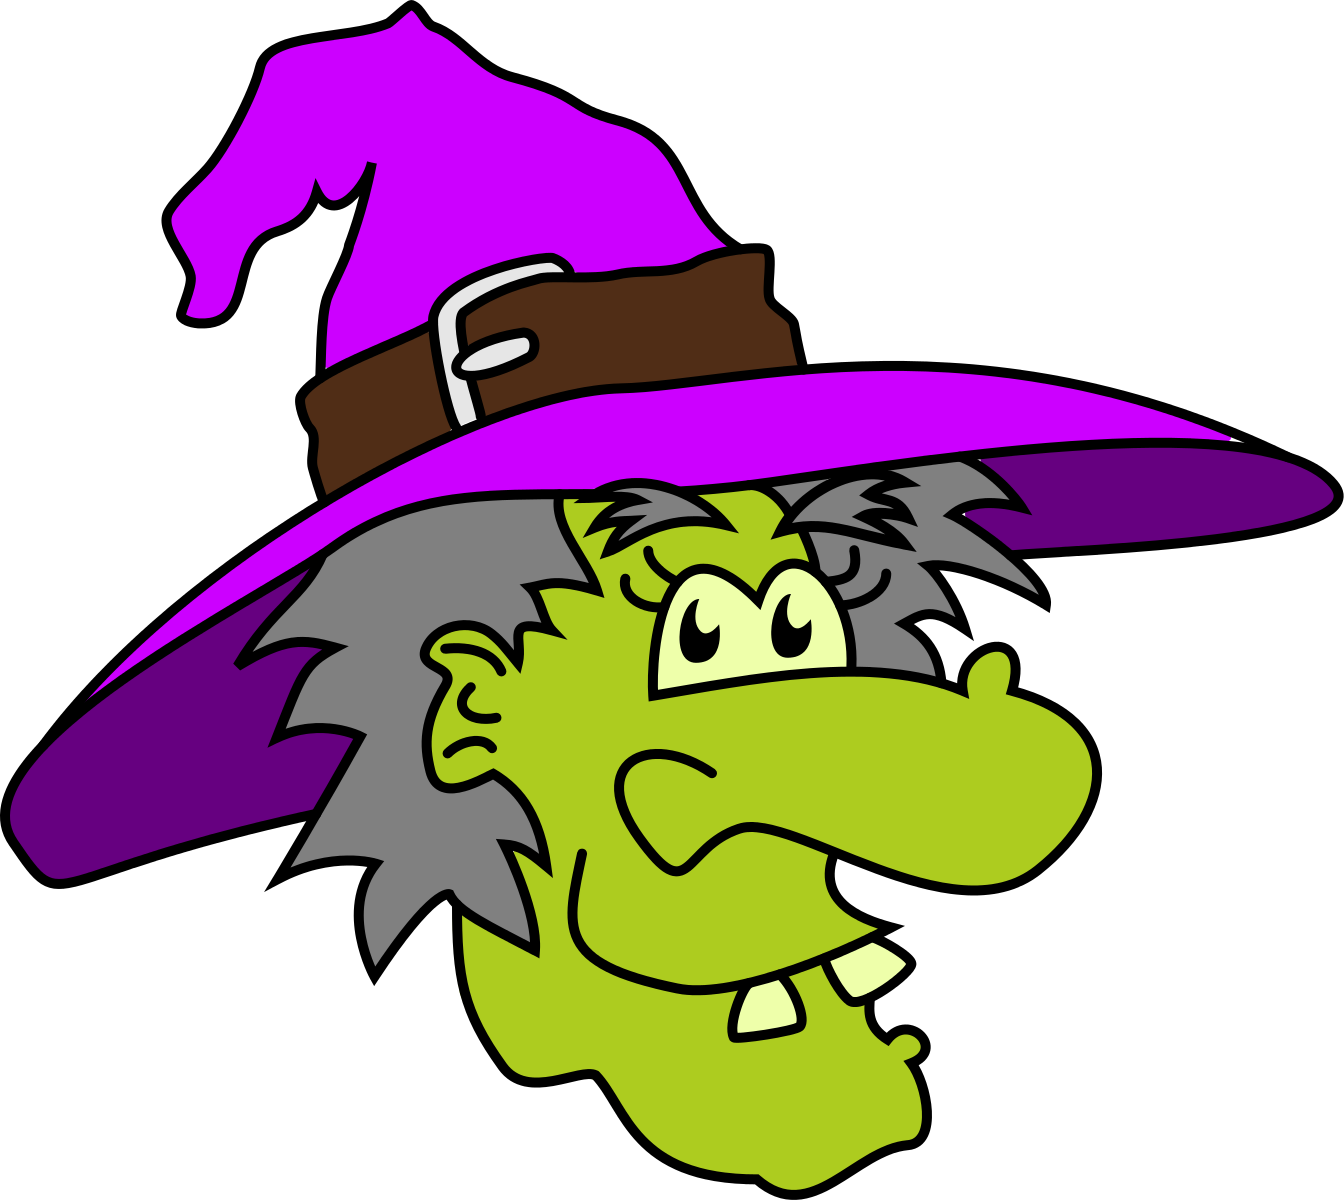 Halloween Witch Clip Art | Clipart Panda - Free Clipart Images